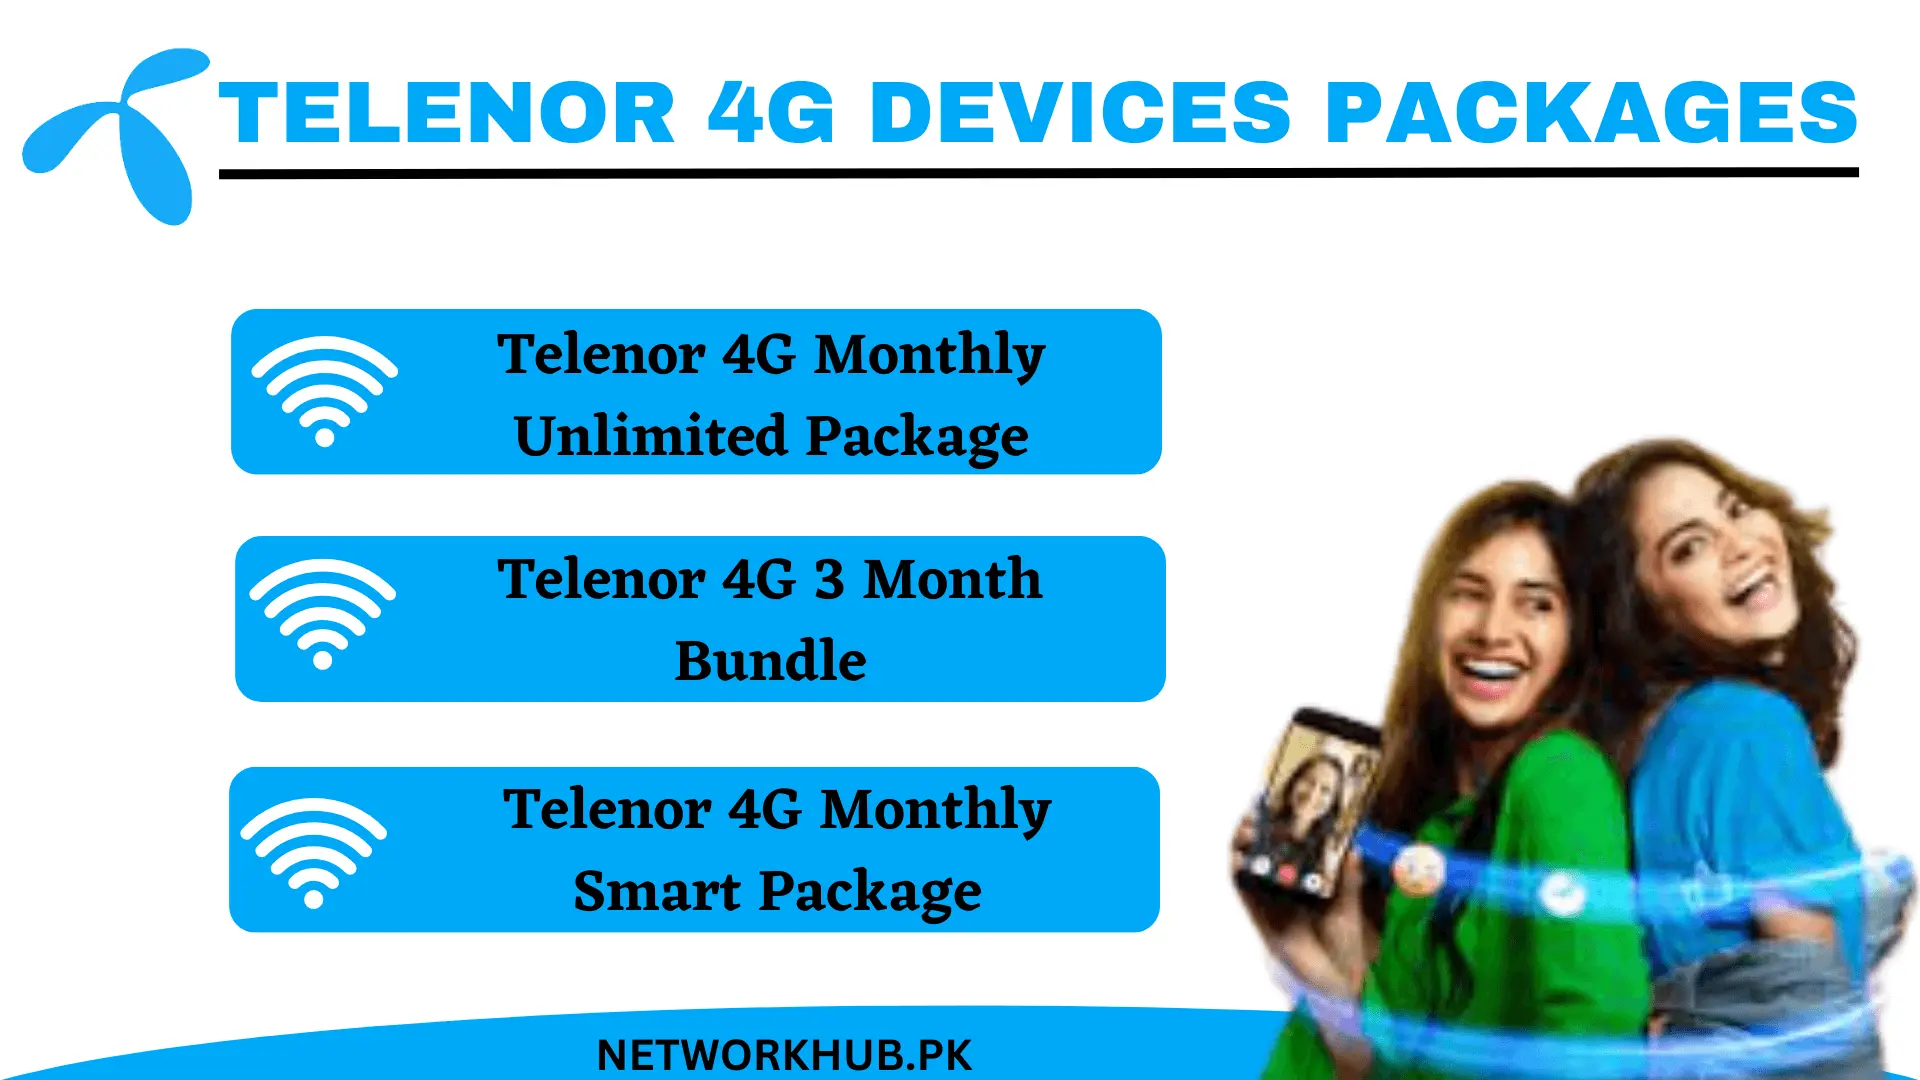 Telenor 4G Devices Packages